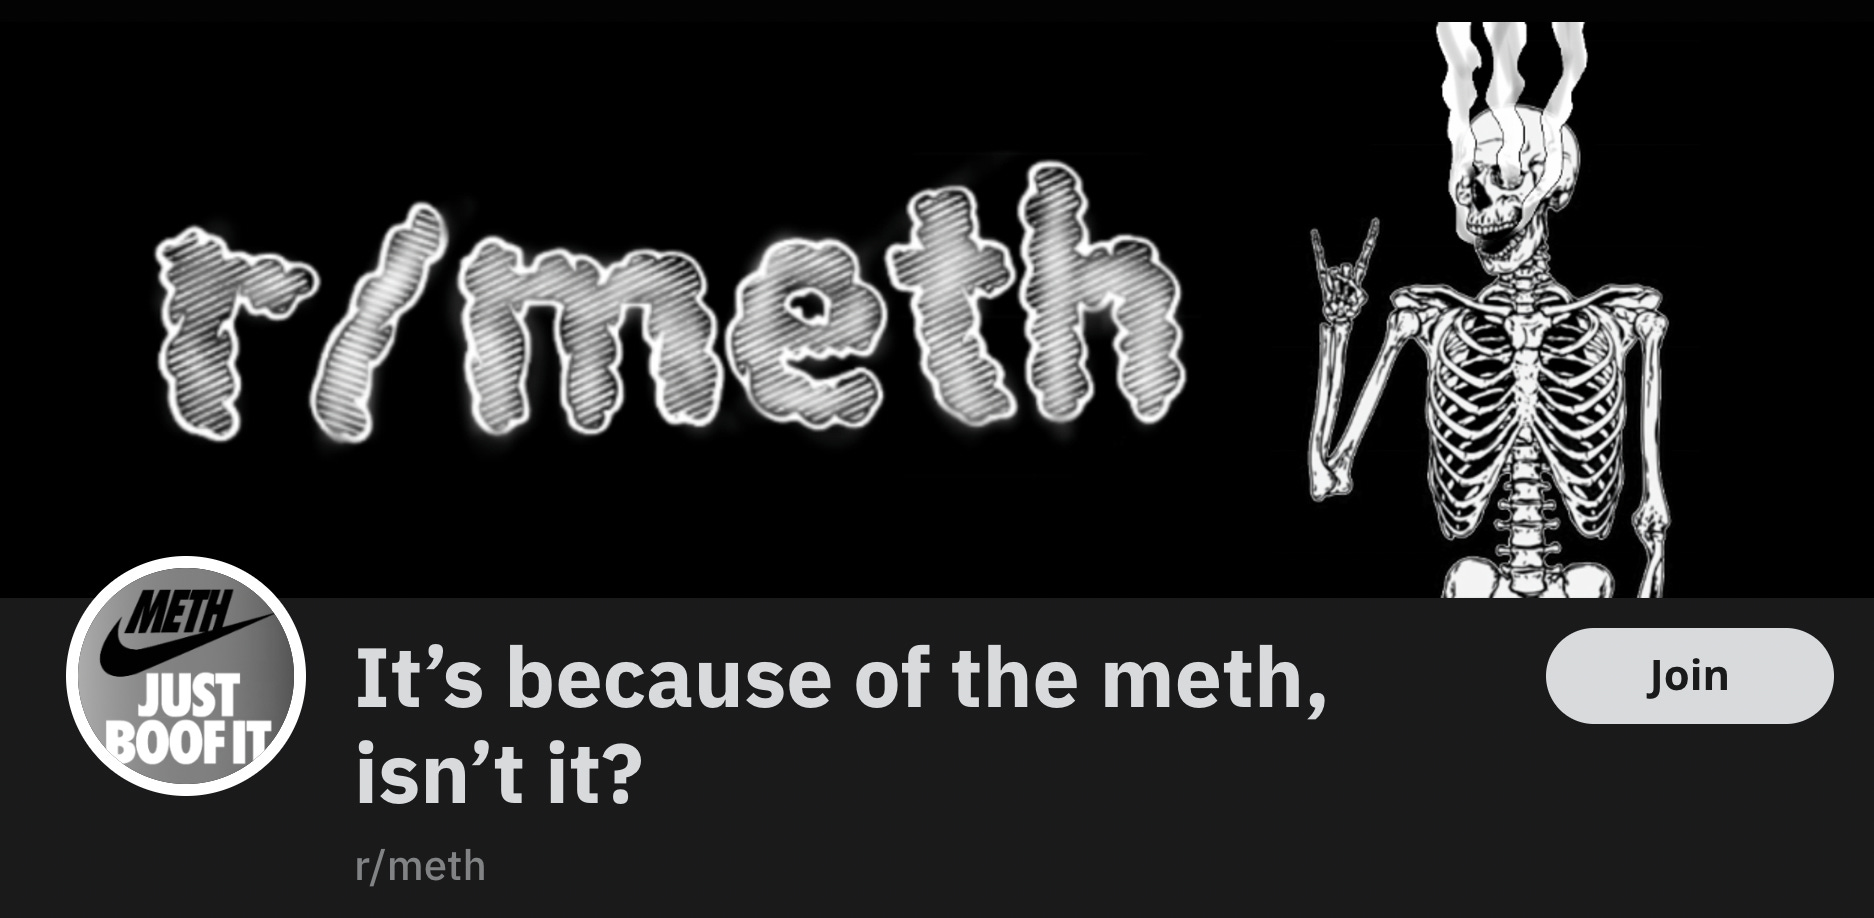 The Strange and Fascinating World of r/meth image